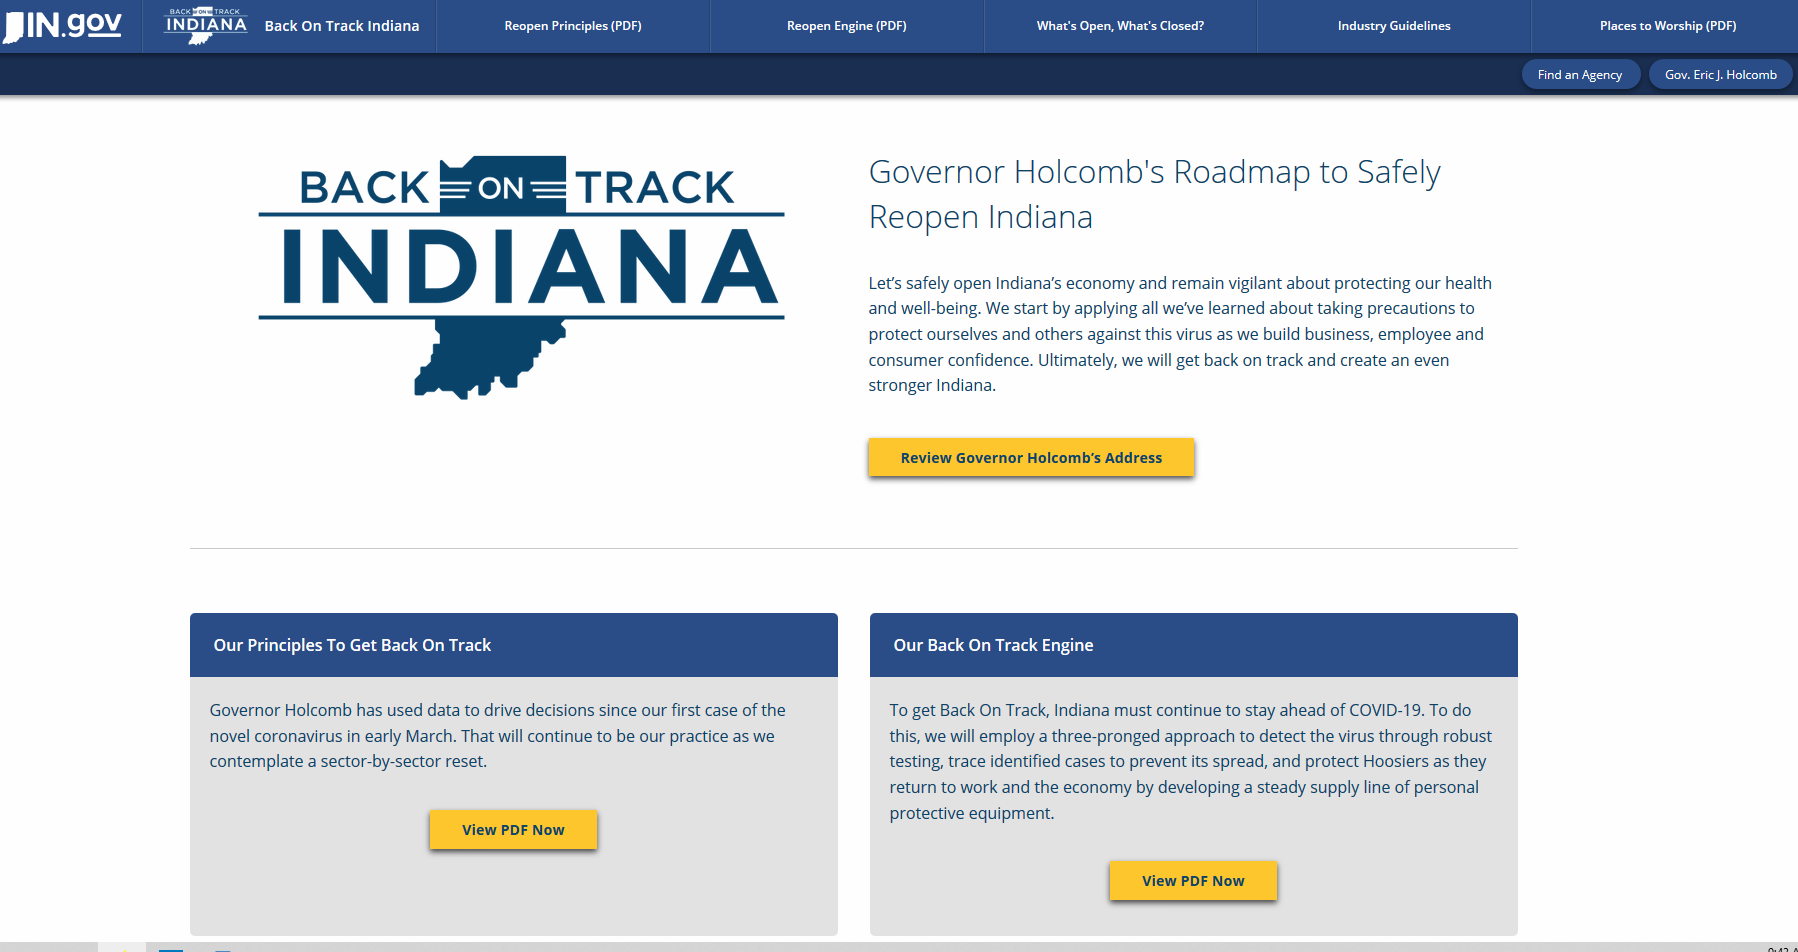 Back on Track Indiana - Gov. Holcomb's Roadmap to Safely Reopen Indiana